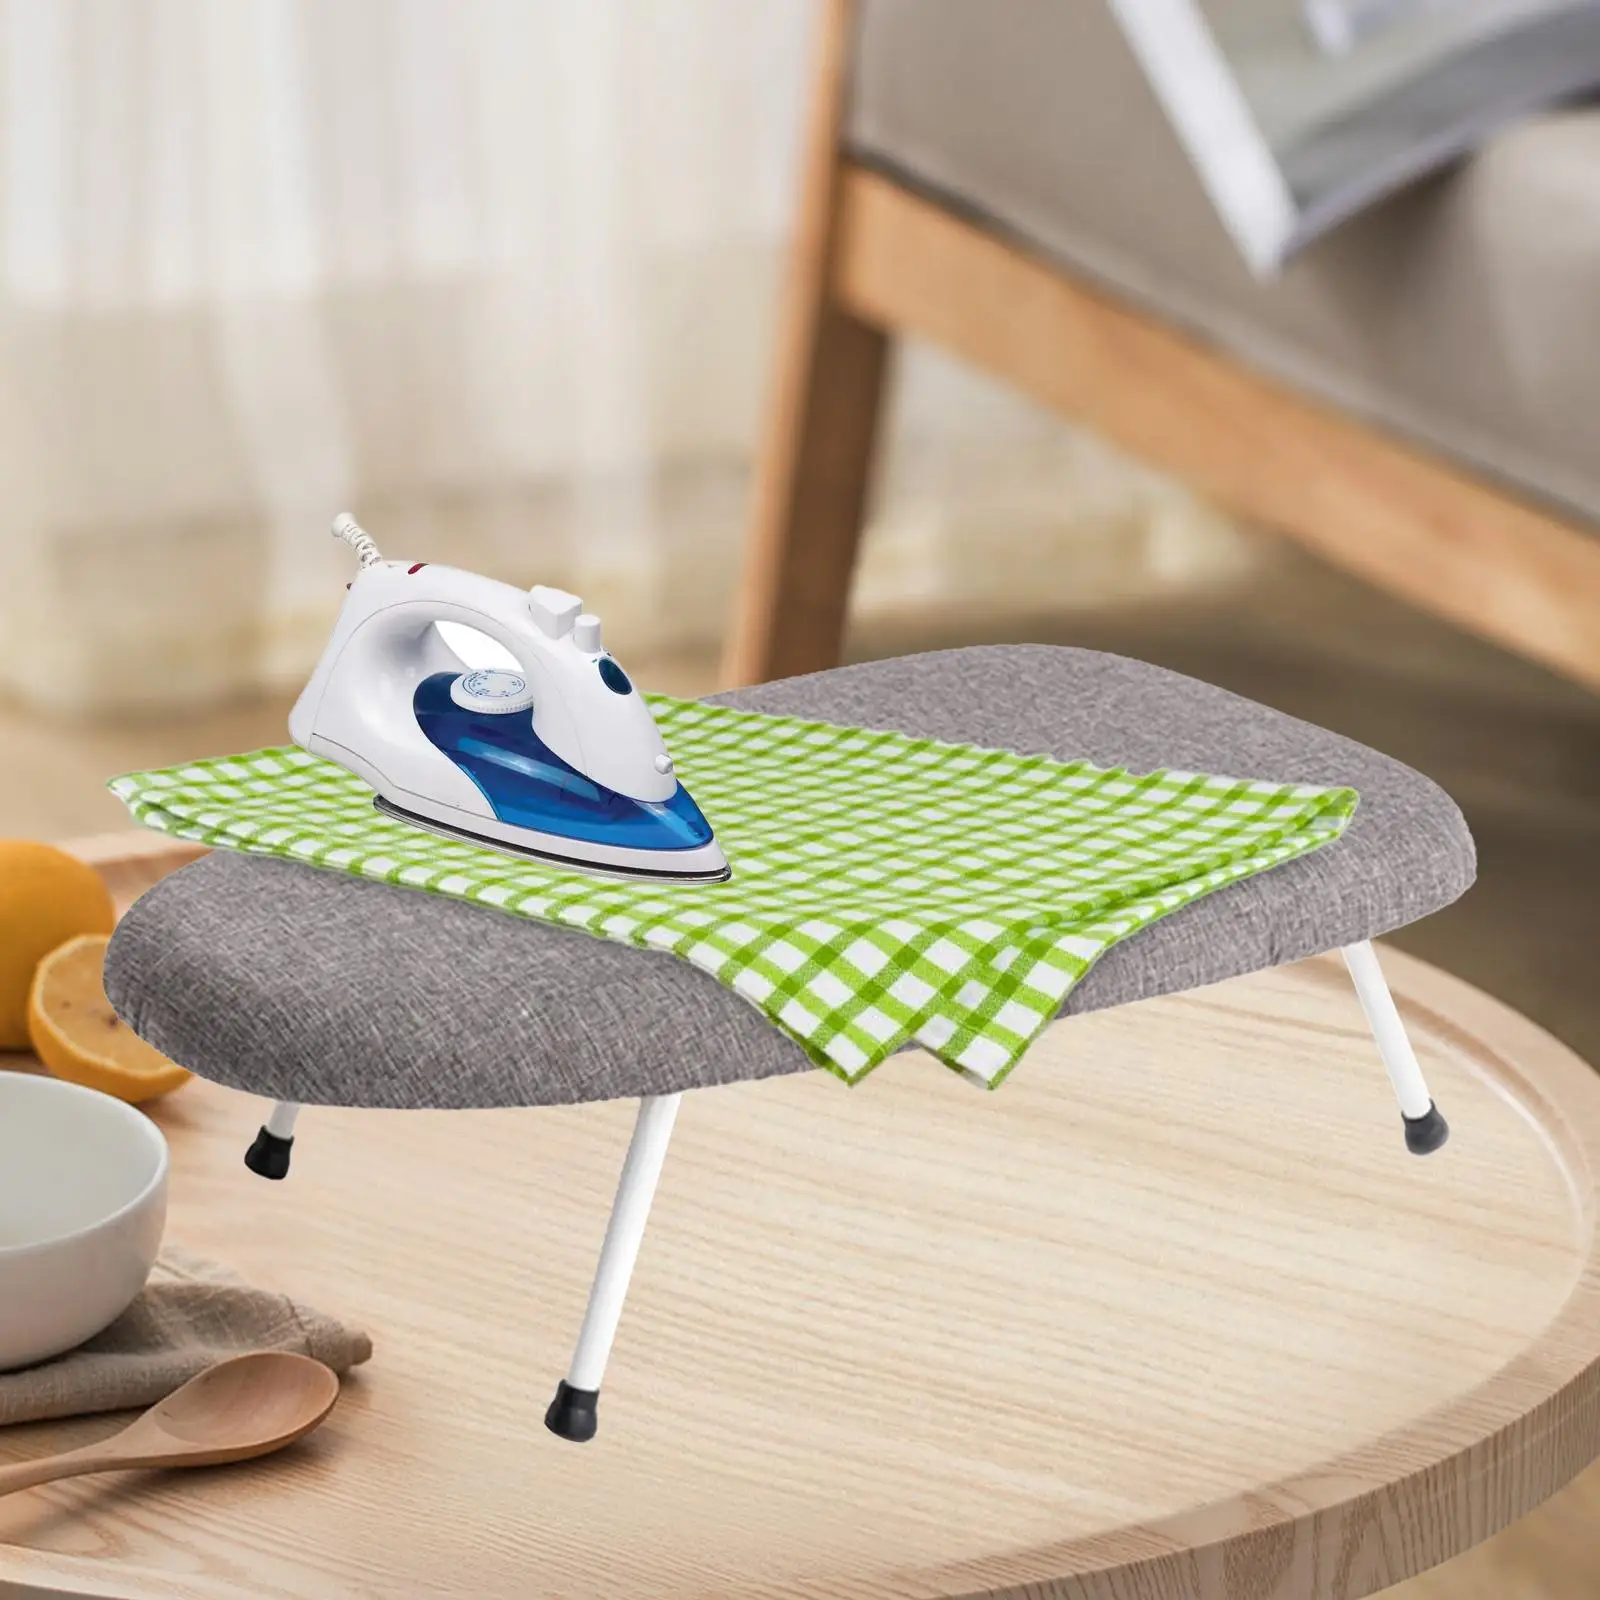 Mini Ironing Board Compact Heavy Duty Space Saving Small Iron Board Foldable for Laundry Room Dorm Apartment Sewing Room Sleeves